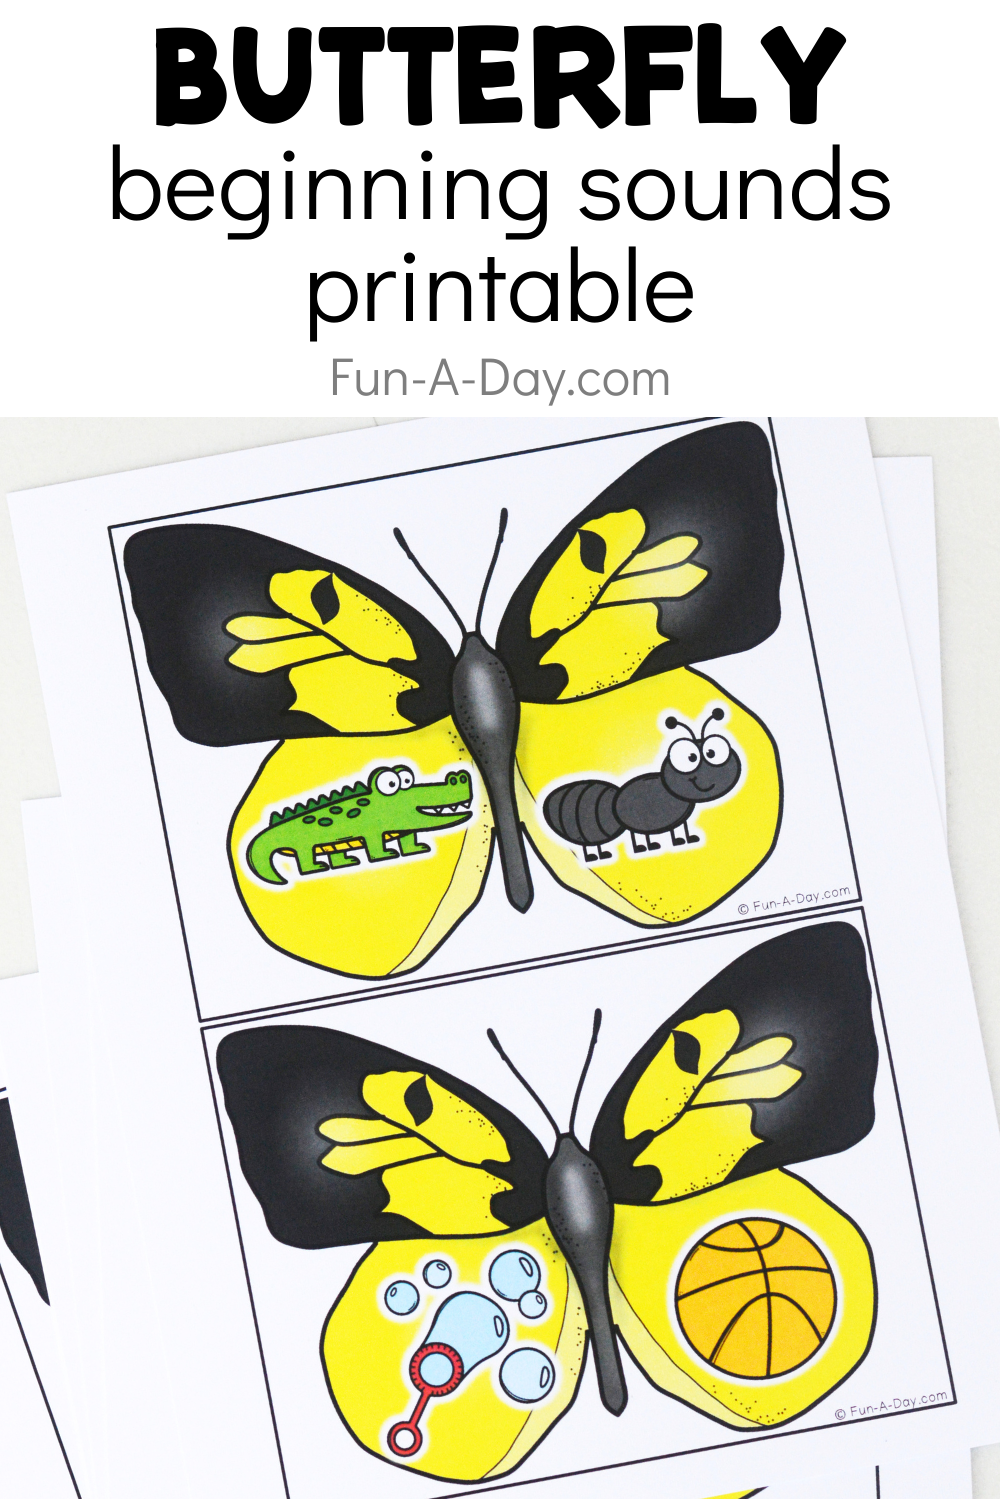 Butterfly beginning sounds printable pages with text that reads butterfly beginning sounds printable